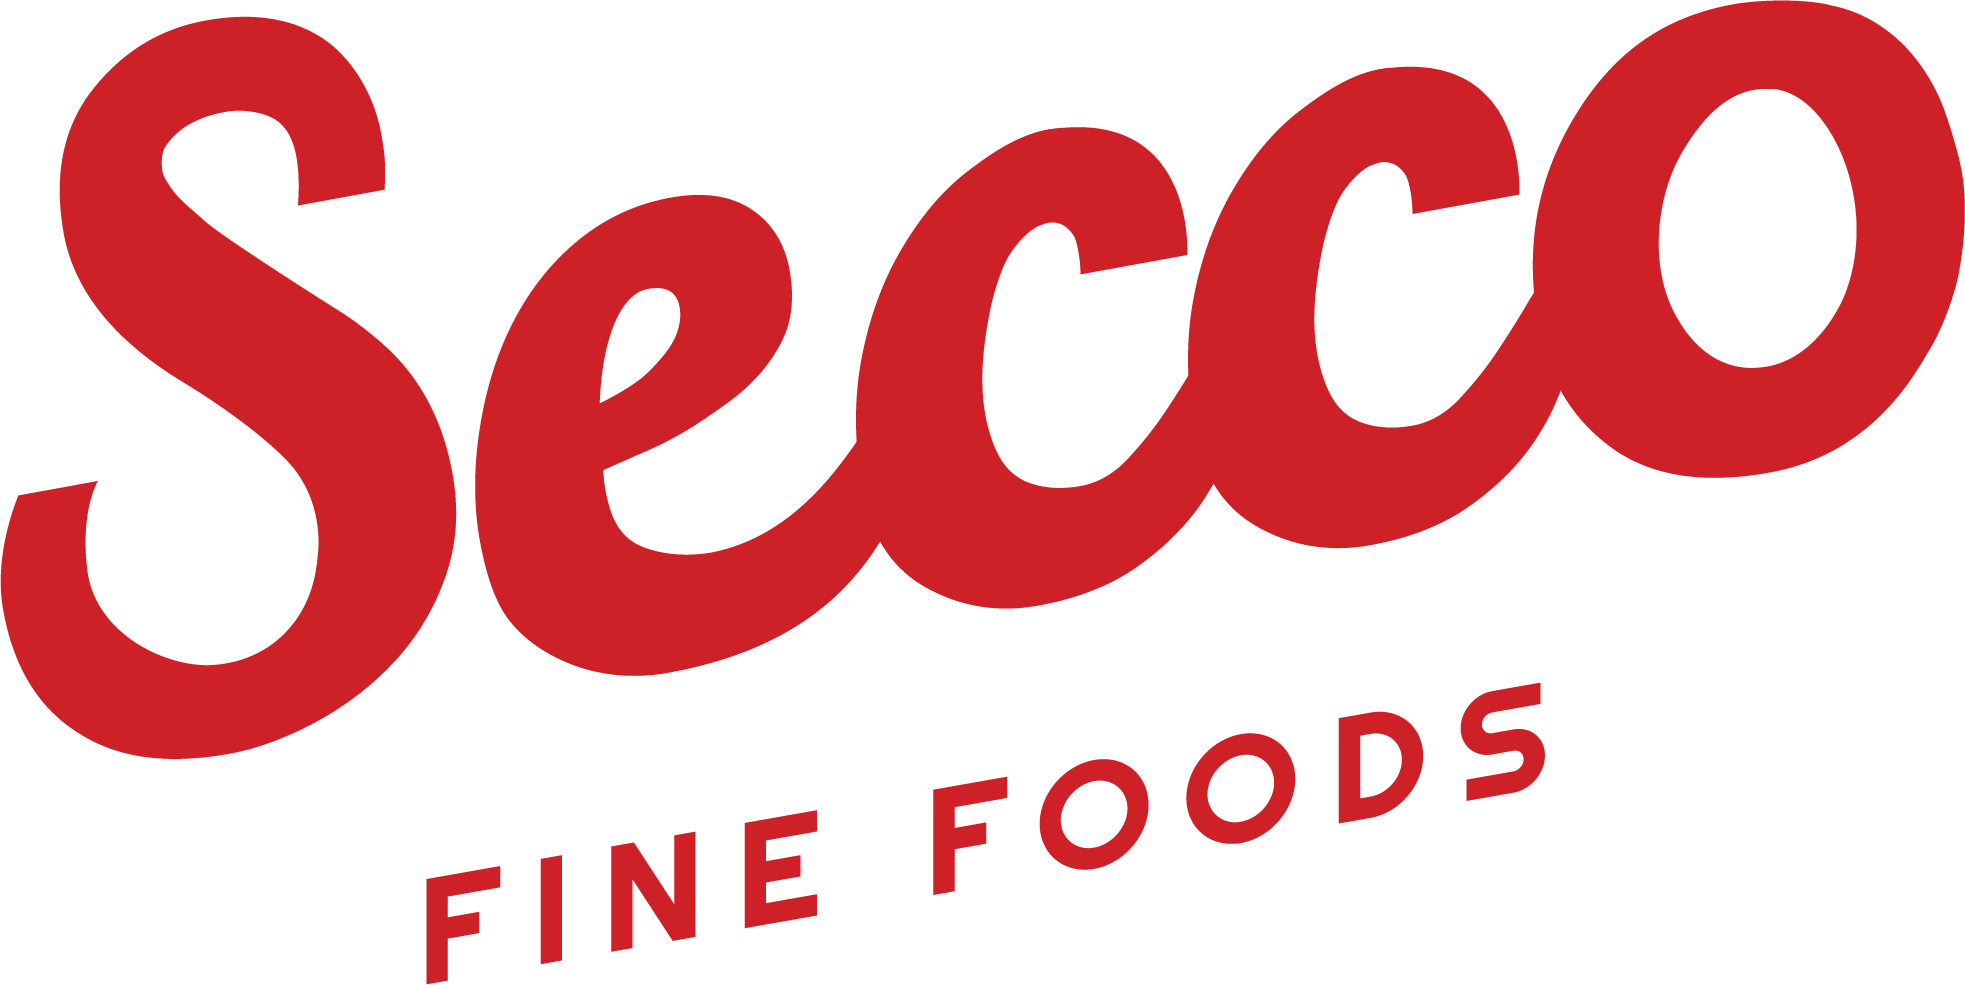 Secco Fine Foods.png